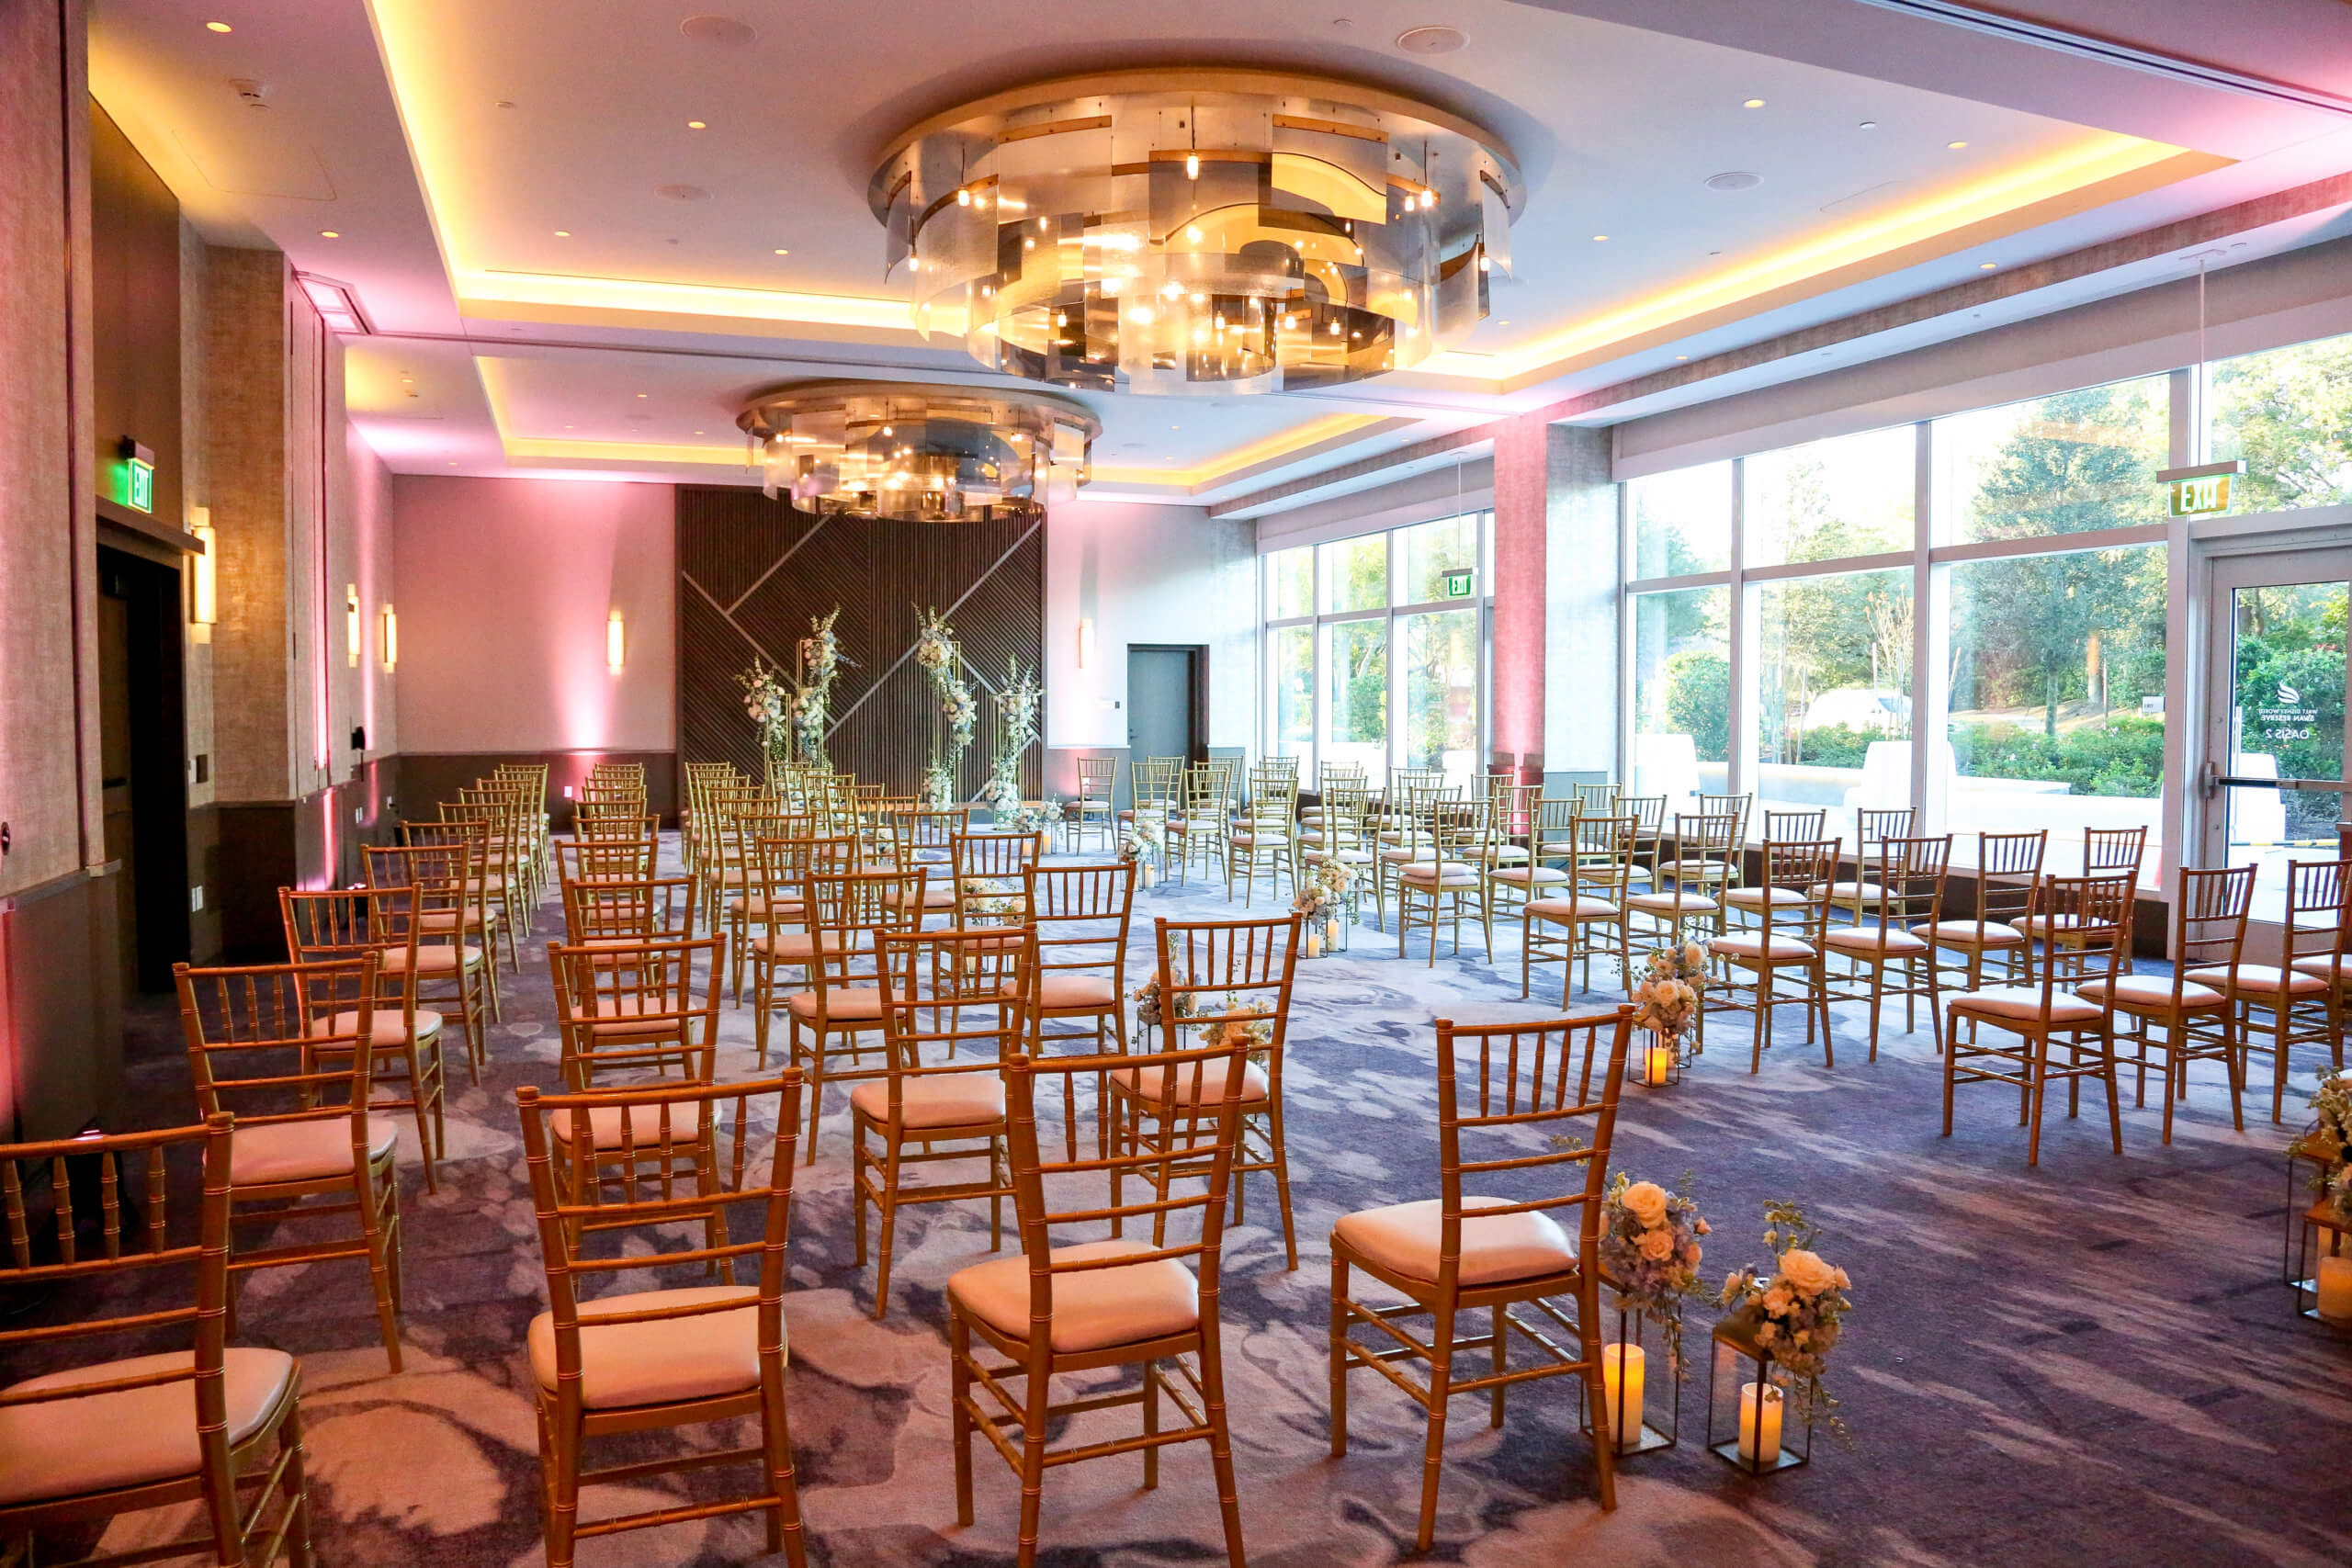 Wedding Ceremony Set-Up in the Oasis Ballroom at the Walt Disney World Swan Reserve